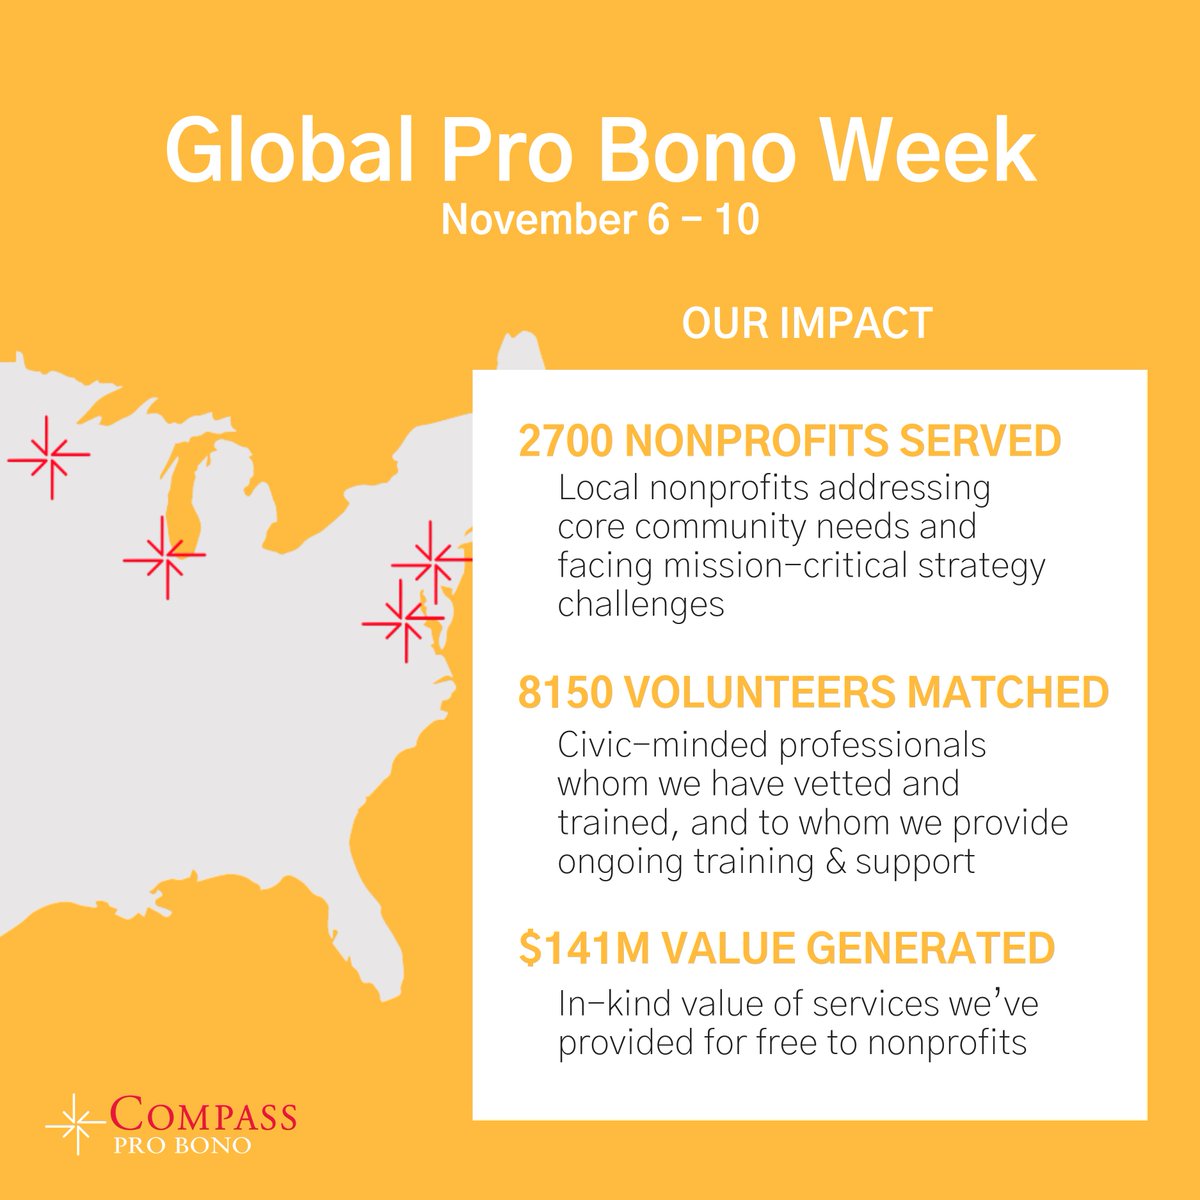 Did you know? It's Global Pro Bono week! Our impact would not be possible without the thousands of inspiring volunteers + nonprofit partners who have participated in our programs since 2001. #GlobalProBonoNetwork @globalprobono